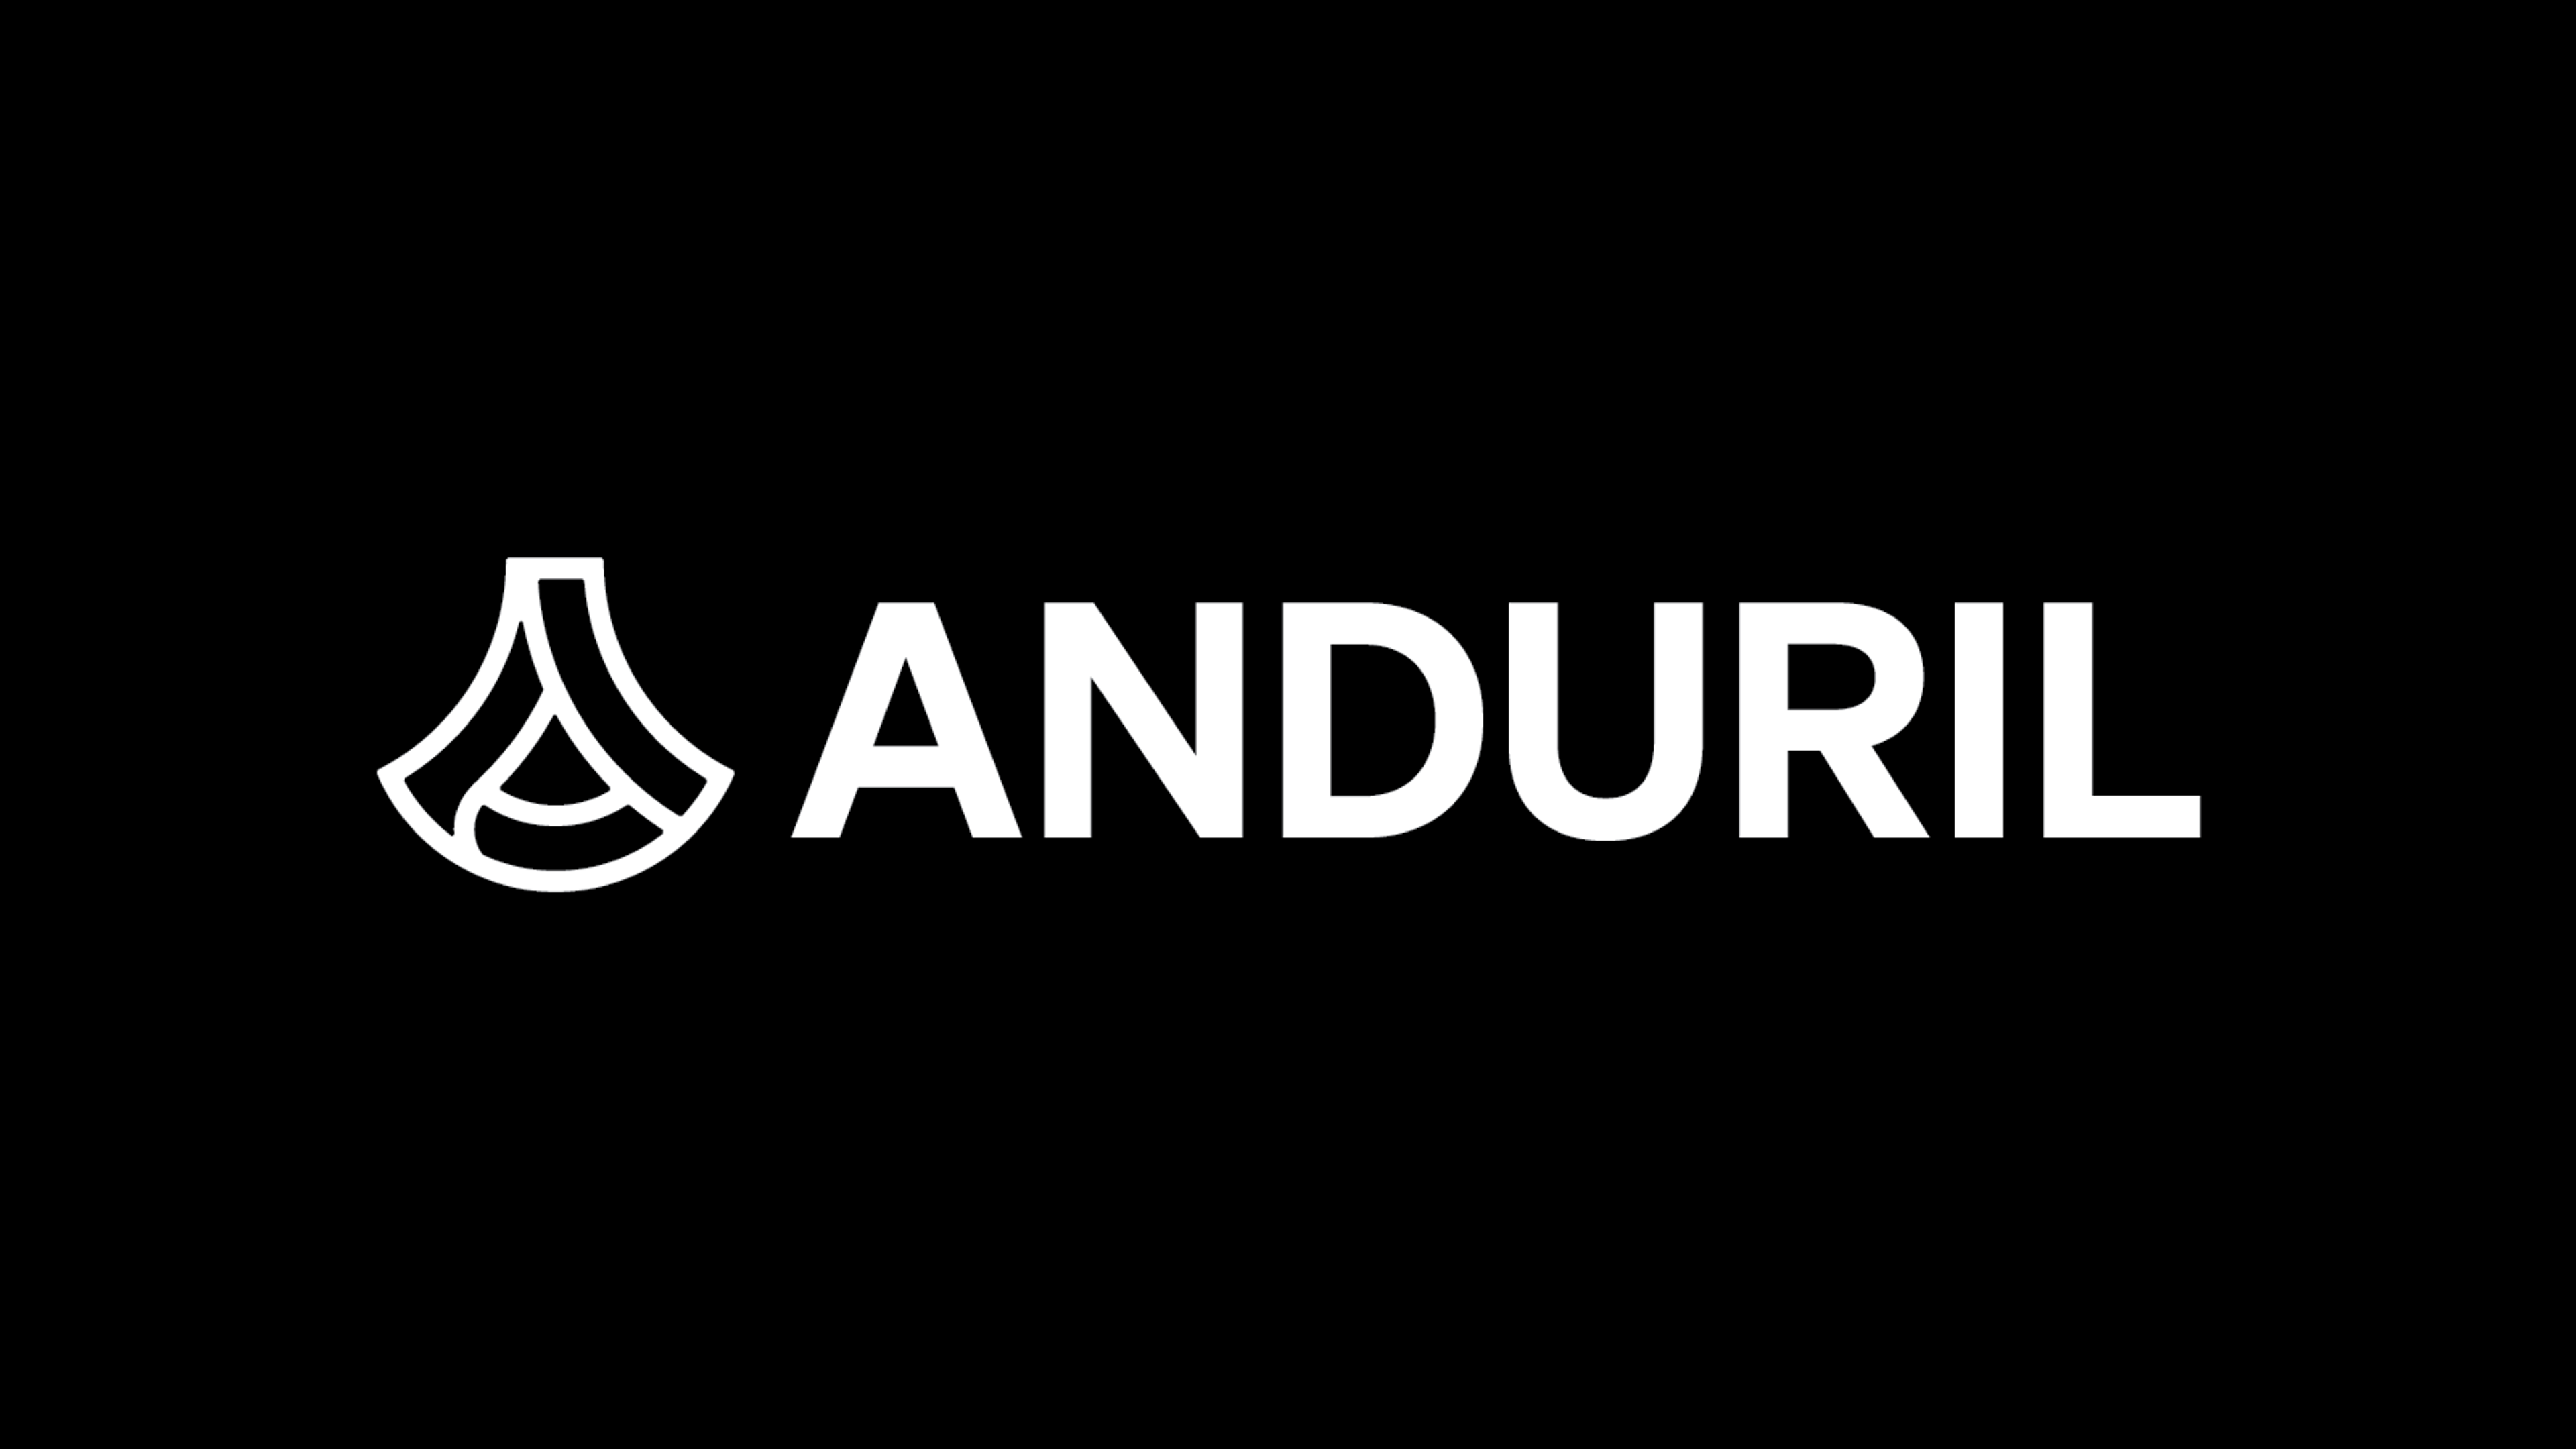 the anduril logo is white on a black background .